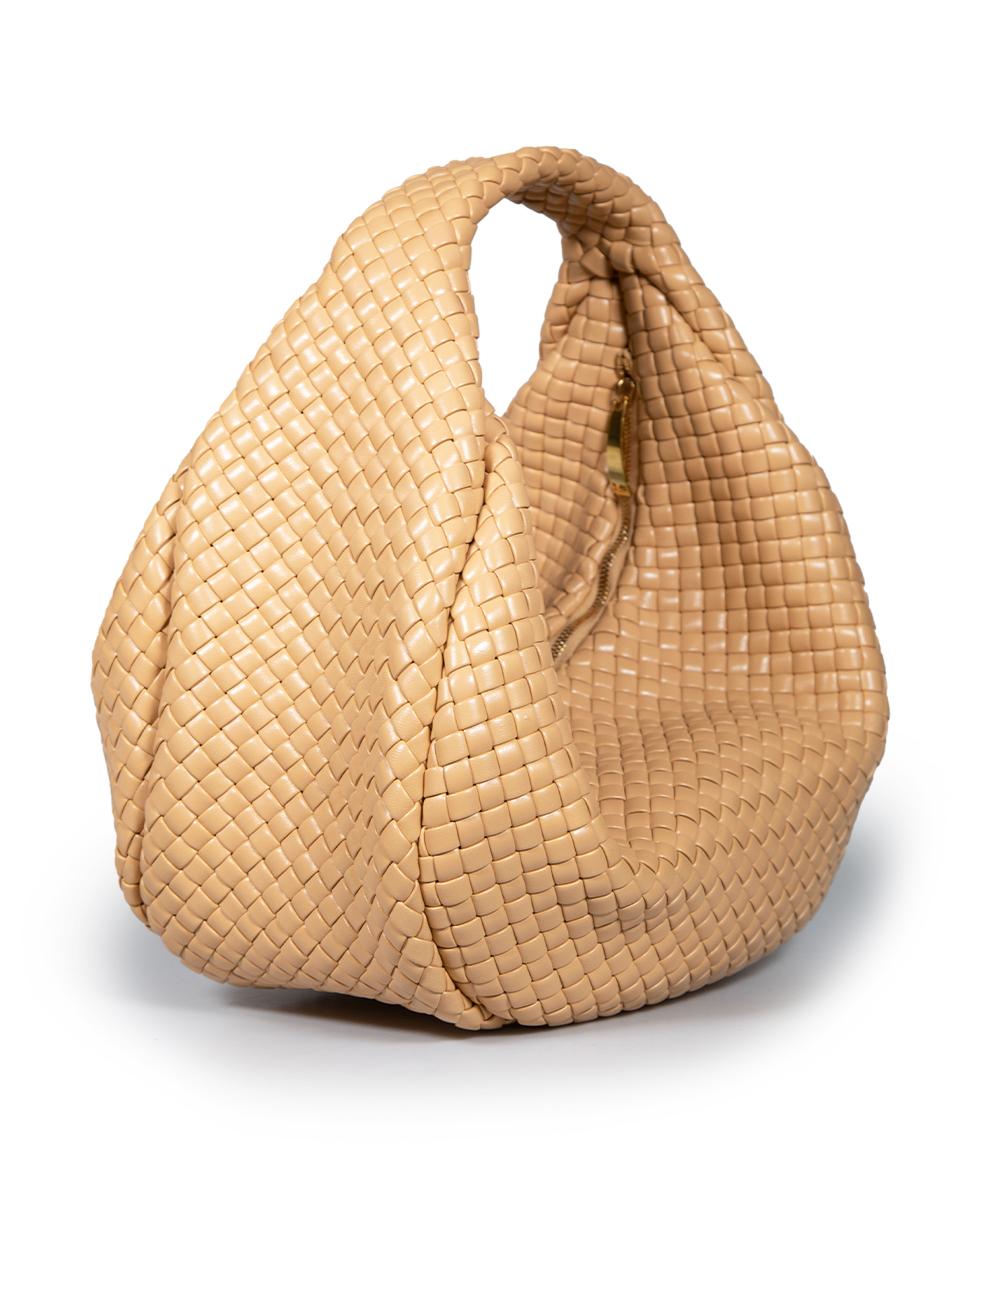 CONDITION is Very good. Minimal wear to bag is evident. Minimal scratches to the front corners, back, sides, inner zip area and bottom of this used Bottega Veneta designer resale item.
 
 
 
 Details
 
 
 Model: Jodie
 
 Beige
 
 Leather
 
 Shoulder